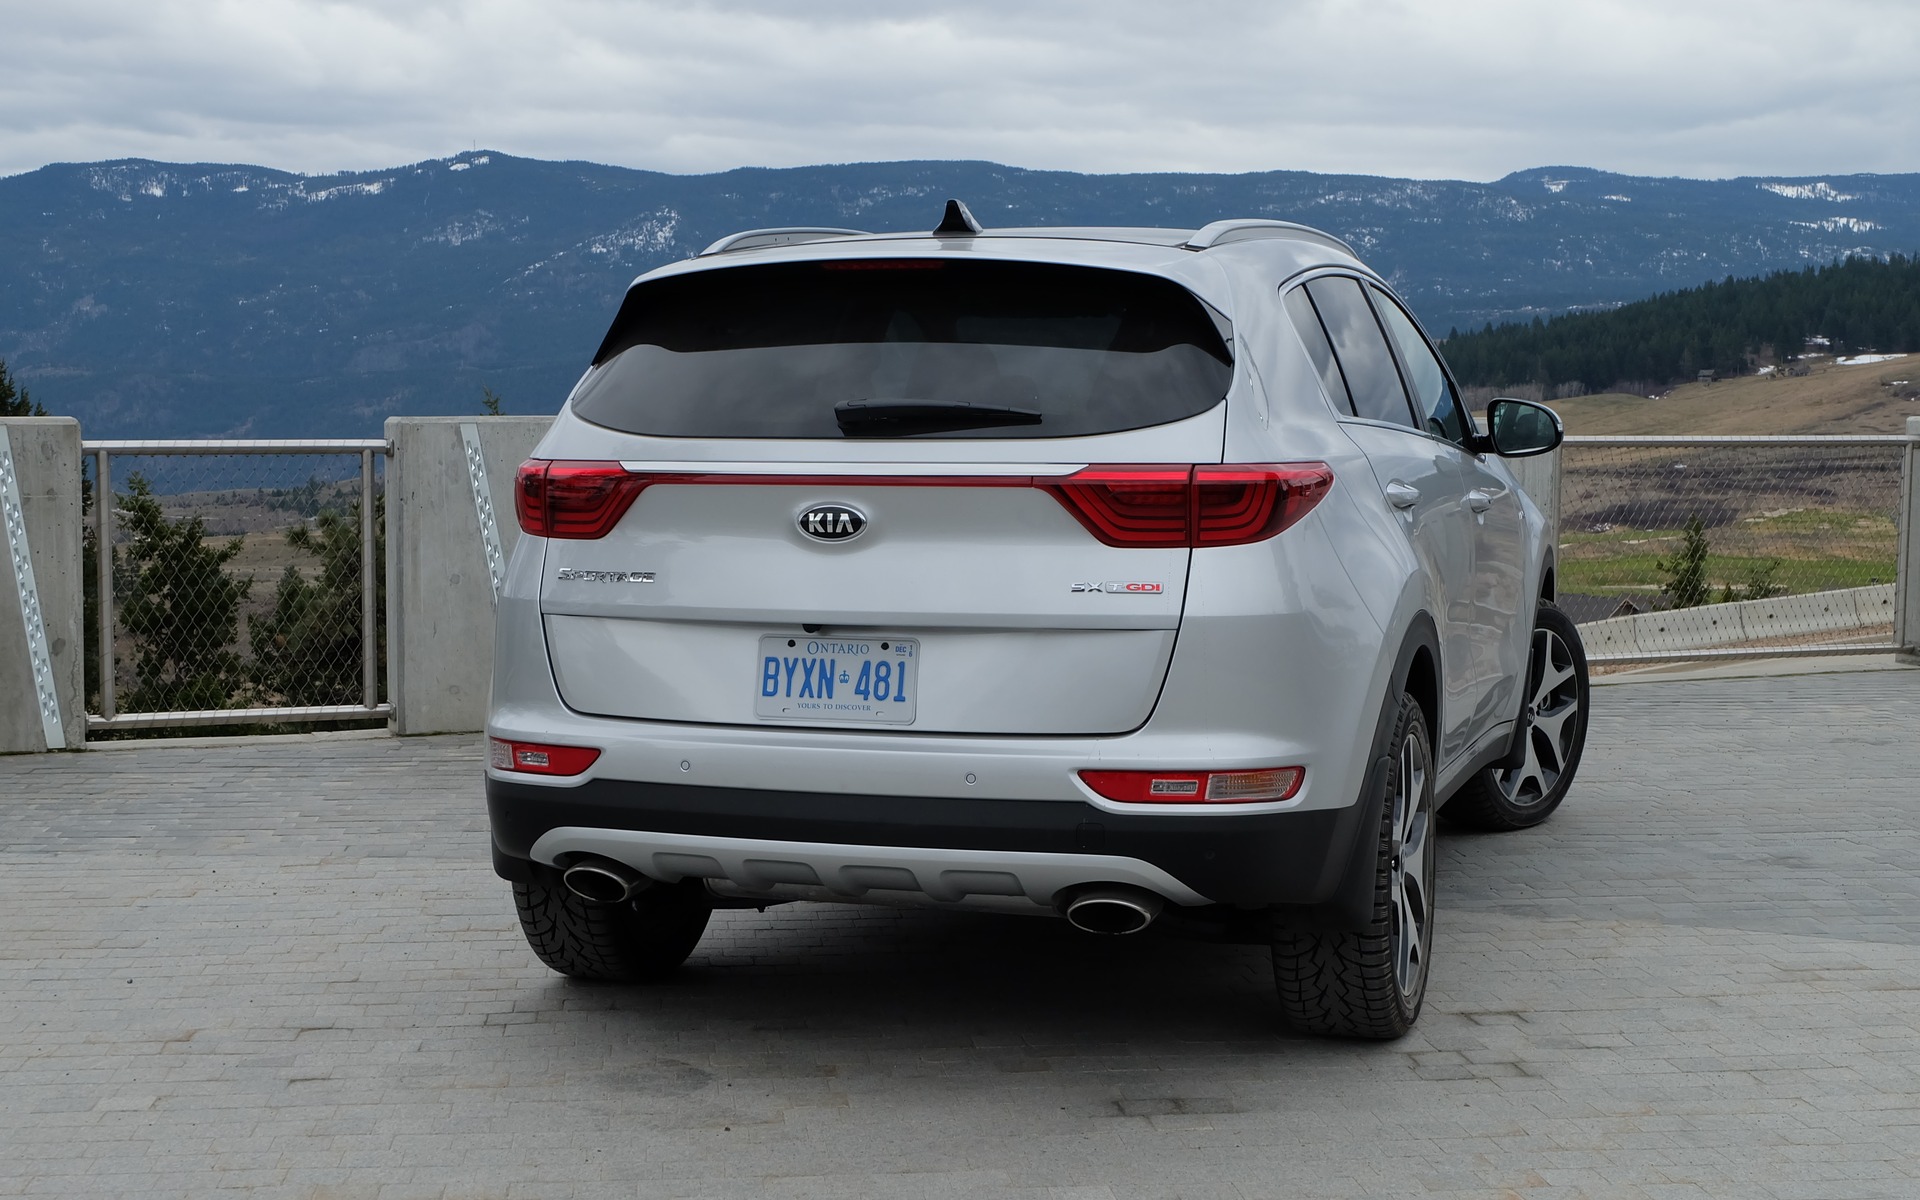 The tail end draws its inspiration from the sizeable K900 sedan.